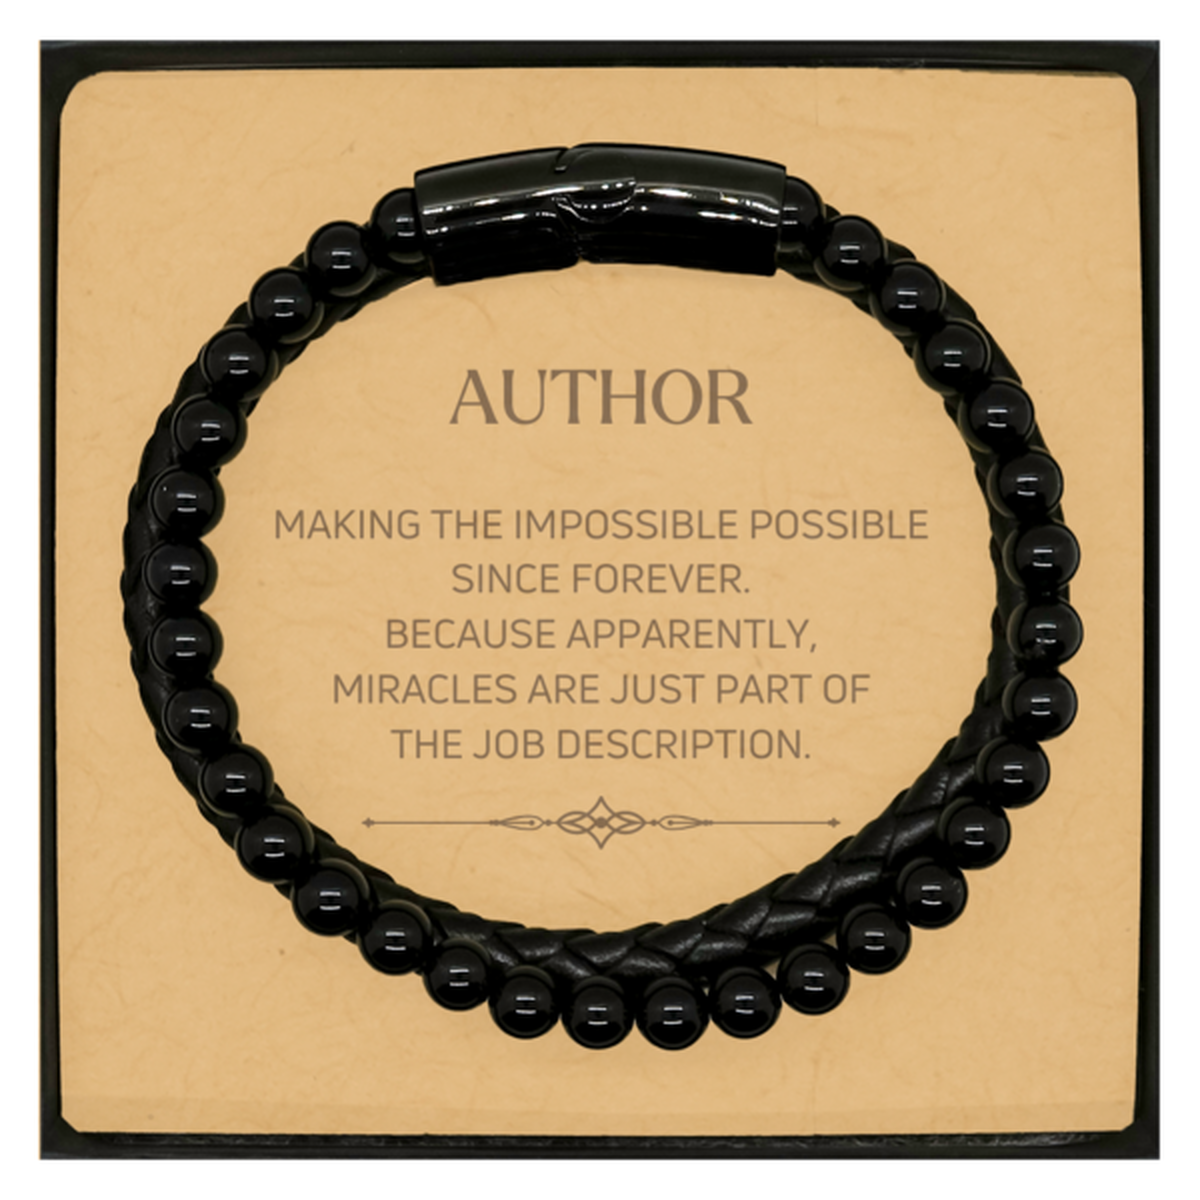 Funny Author Gifts, Miracles are just part of the job description,  Inspirational Birthday Christmas Stone Leather Bracelets For Author, Men,  Women, Coworkers, Friends, Boss